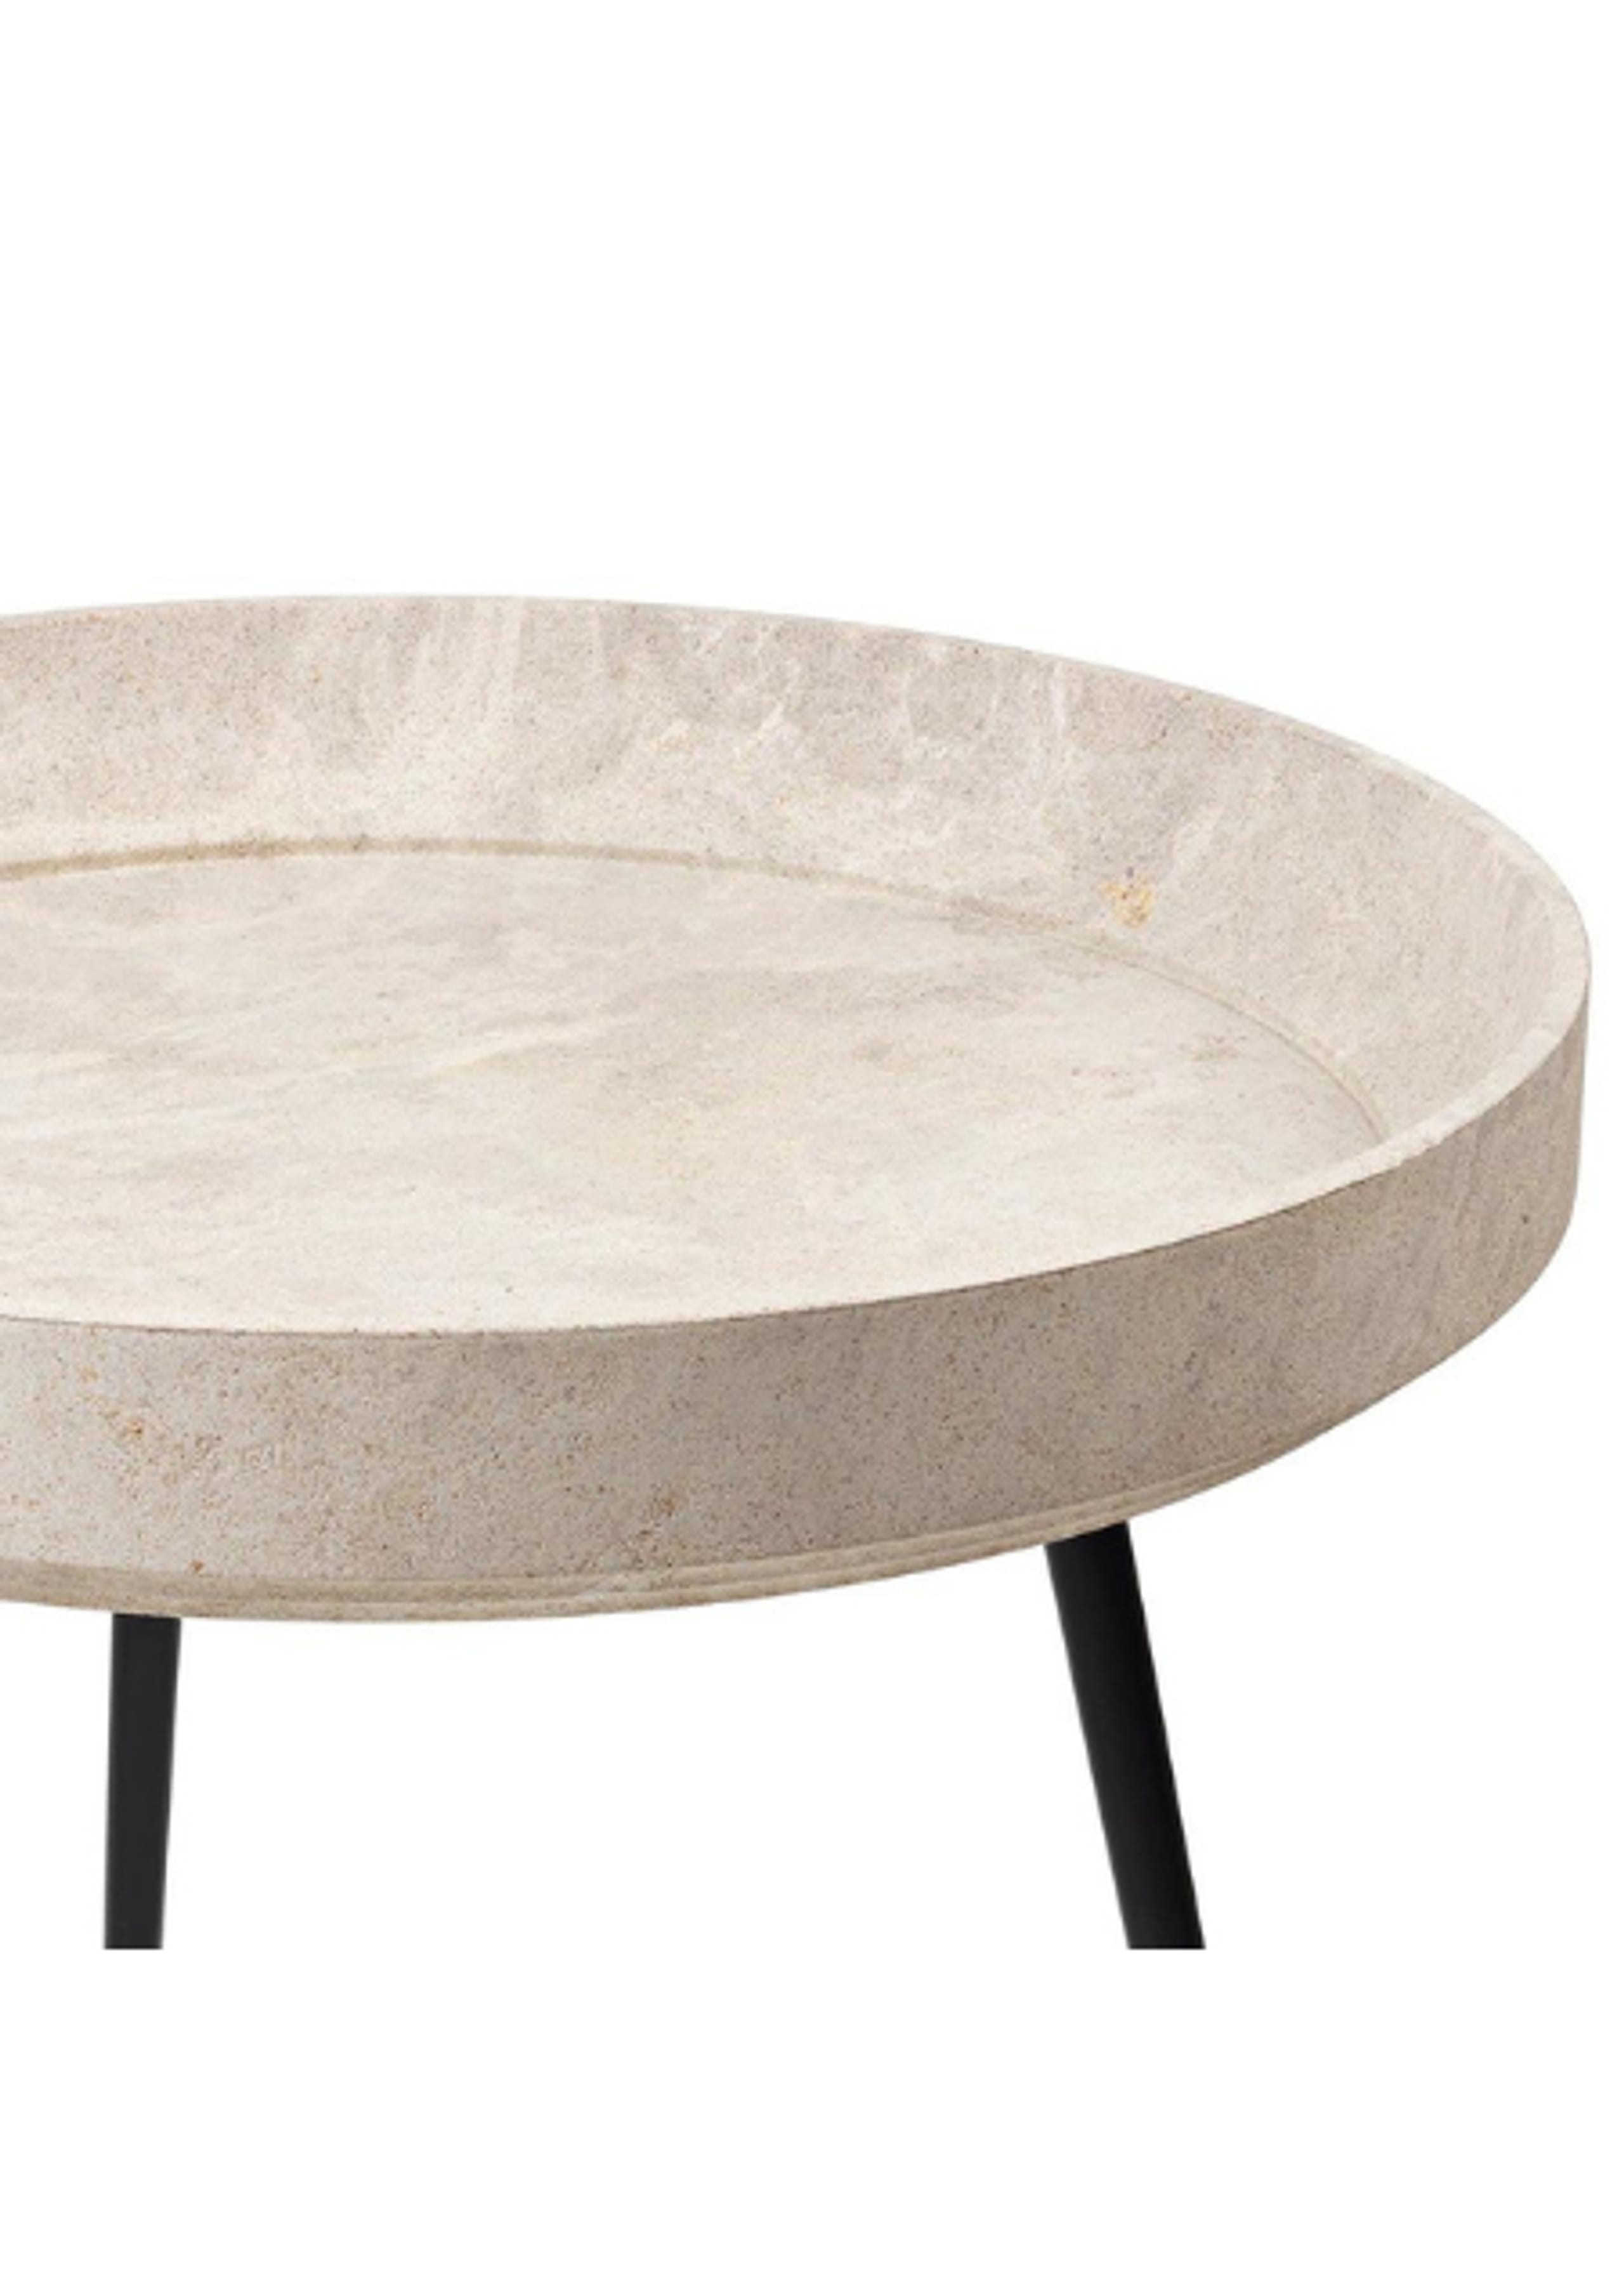 Mater - Table - Bowl Table - Grey Waste - Medium